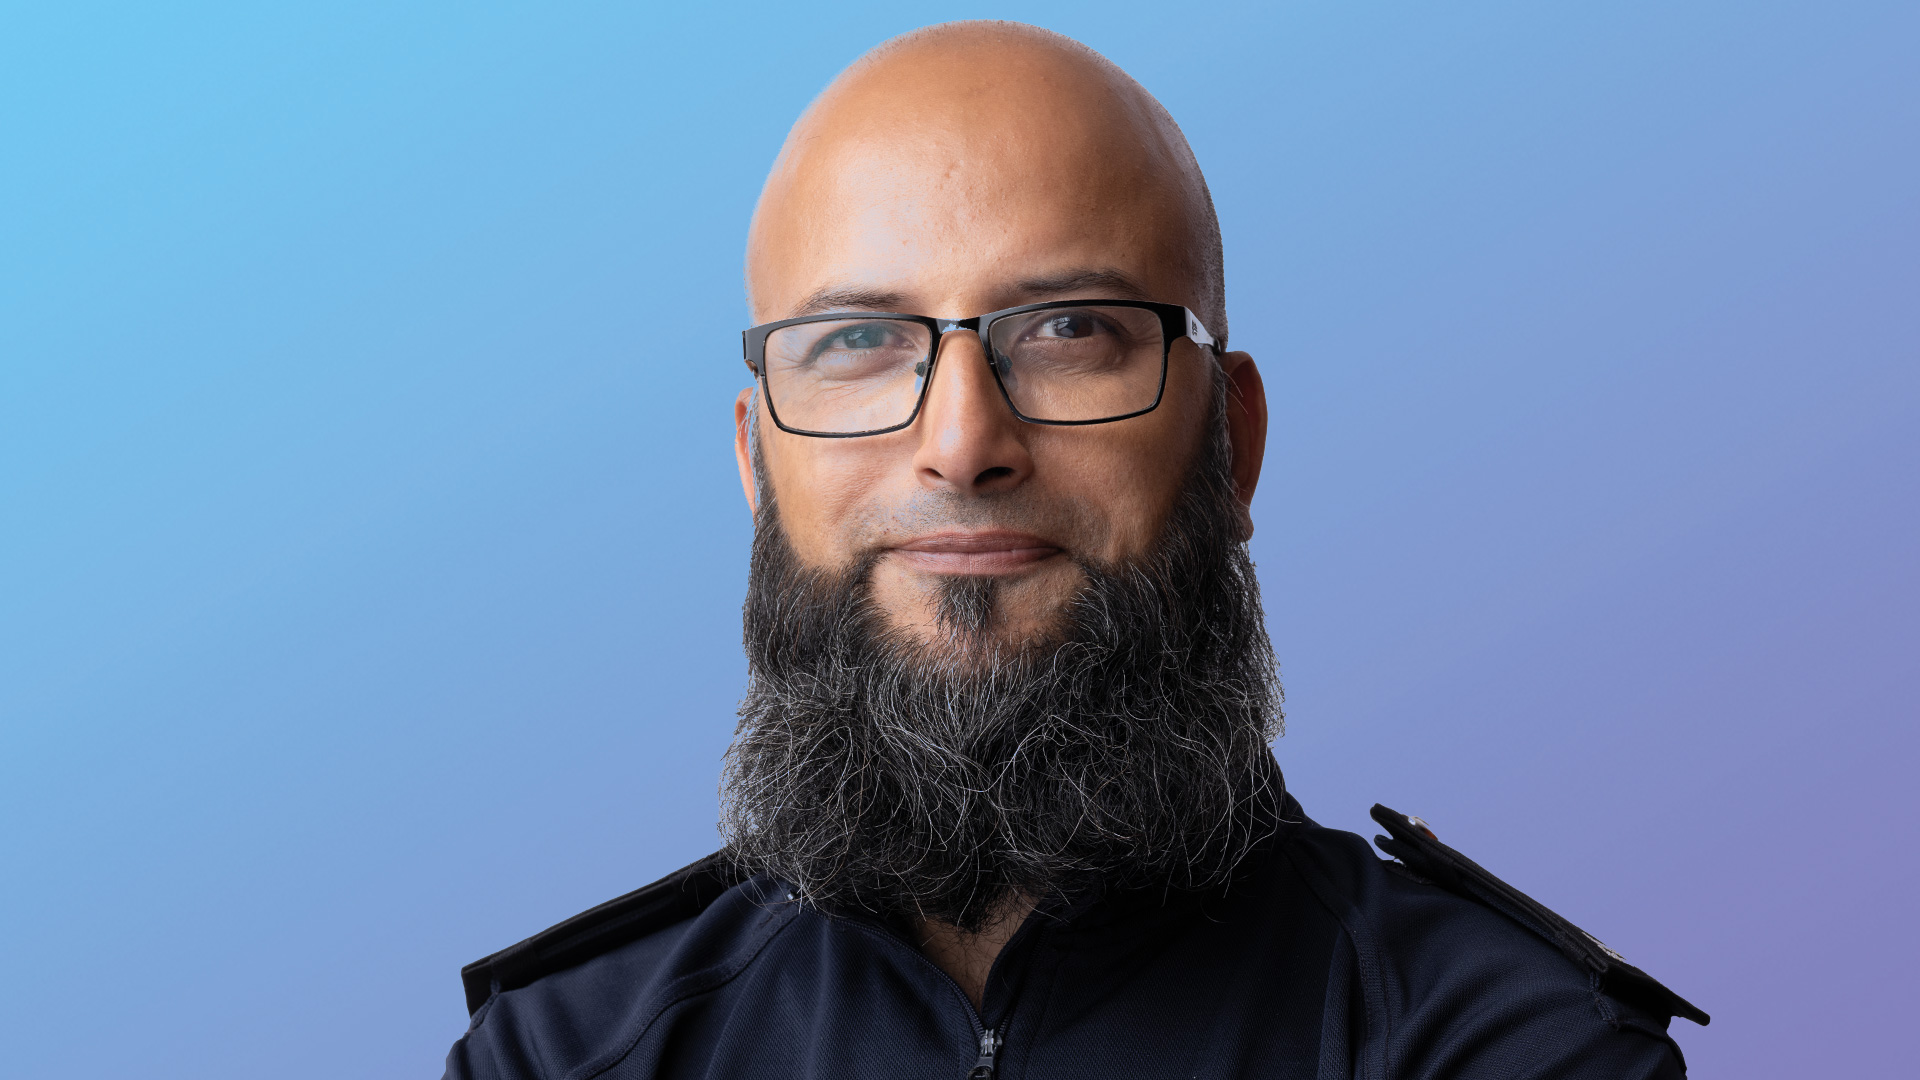 Male Immigration Officer on a blue gradient background